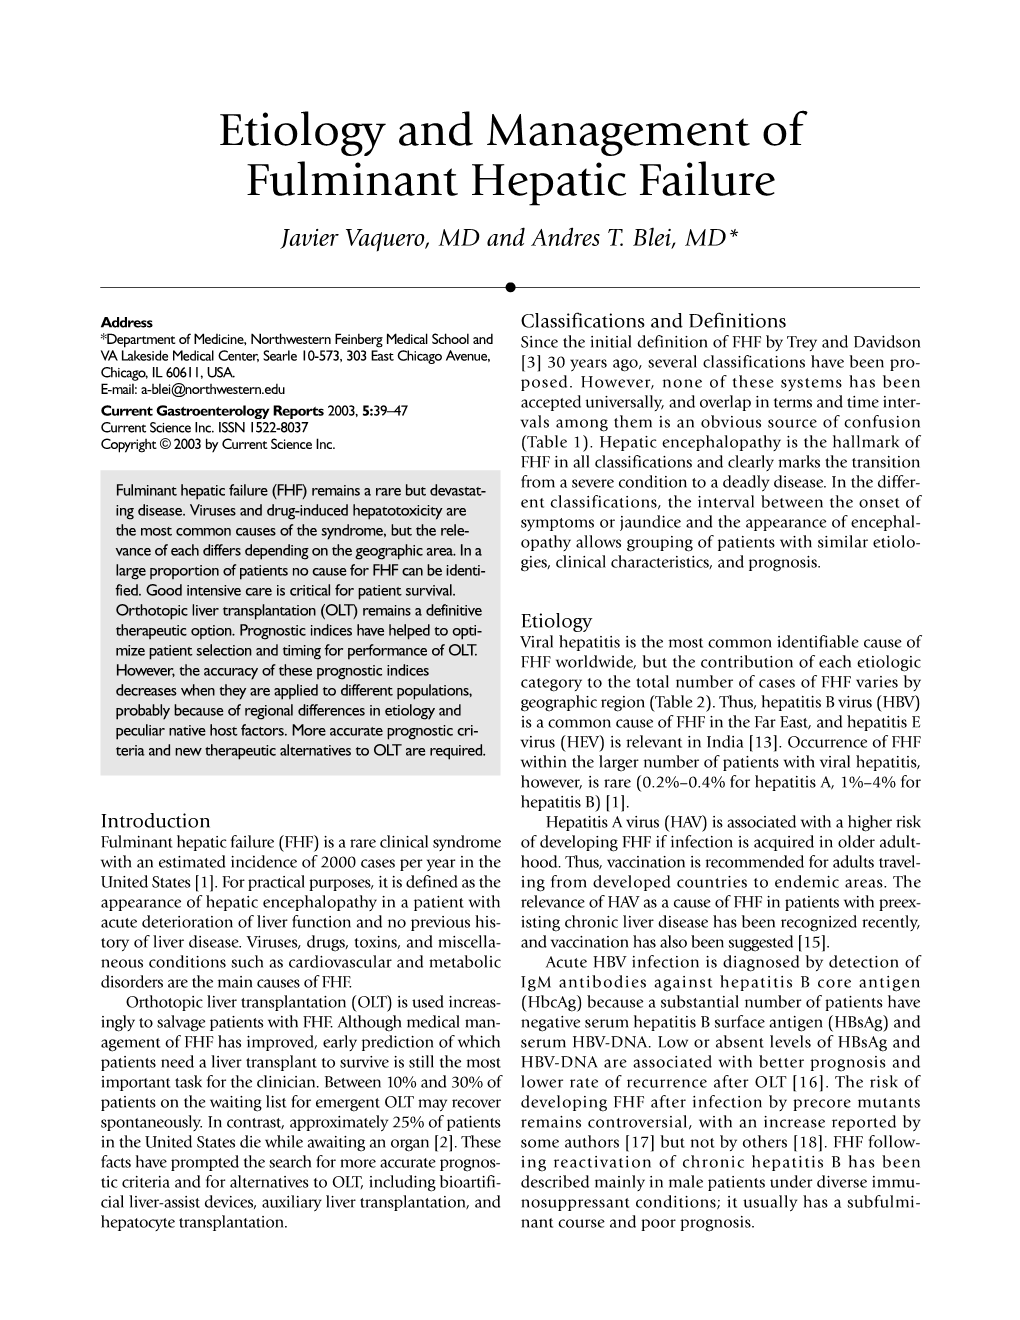 Etiology and Management of Fulminant Hepatic Failure Javier Vaquero, MD and Andres T